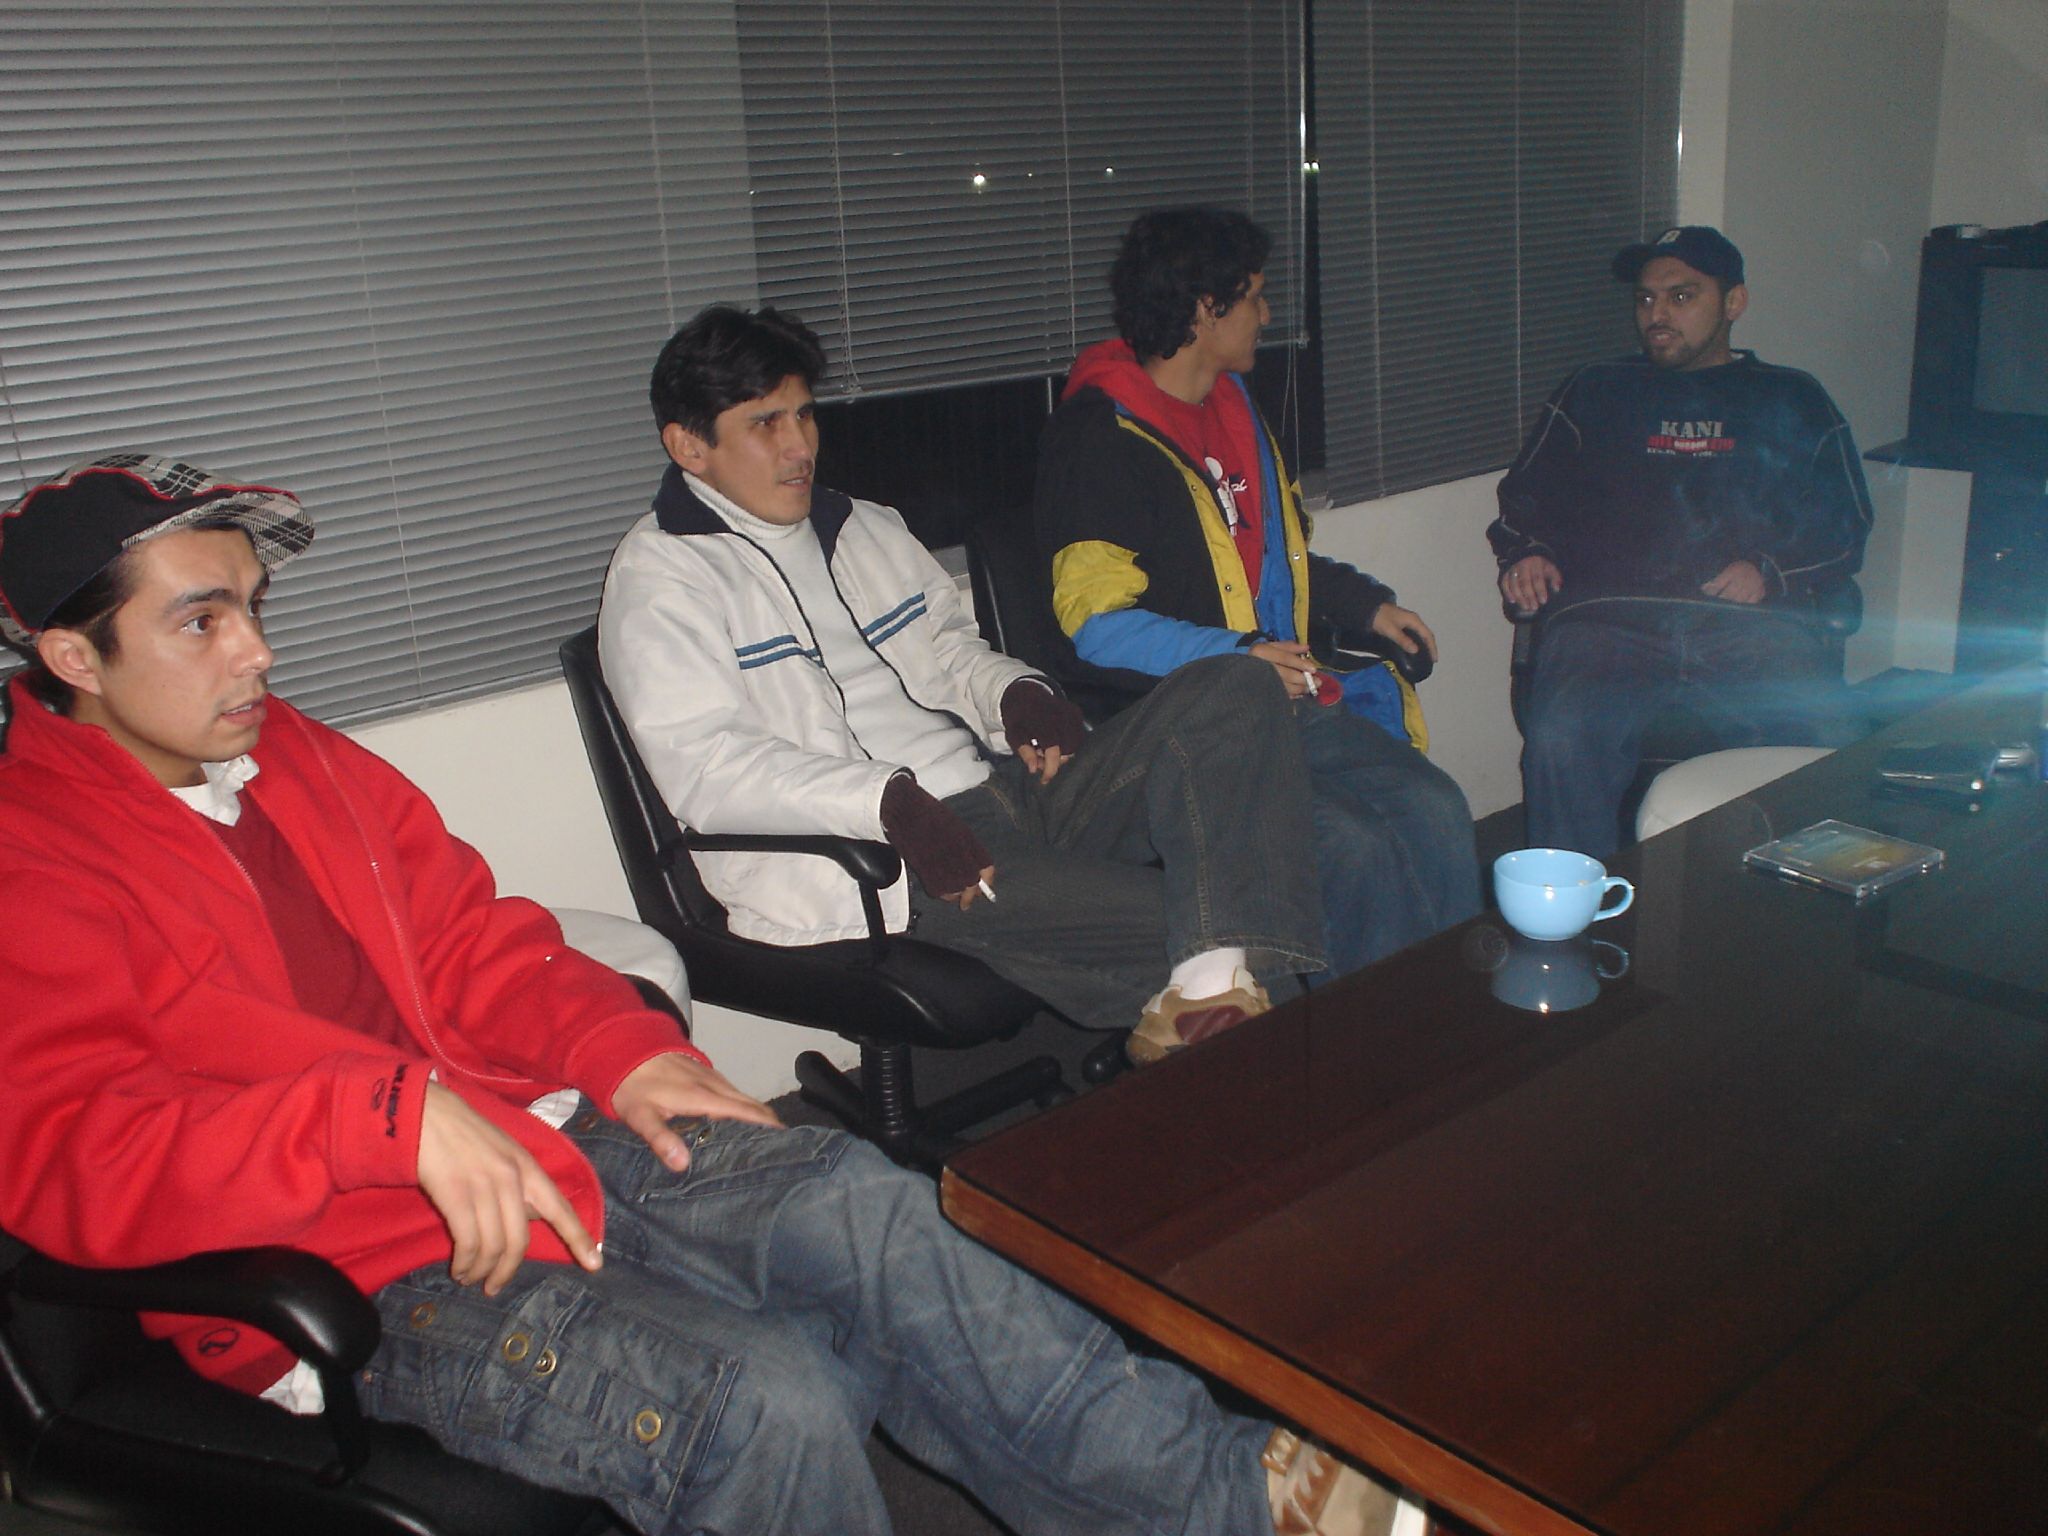 four men are sitting at a table playing wii